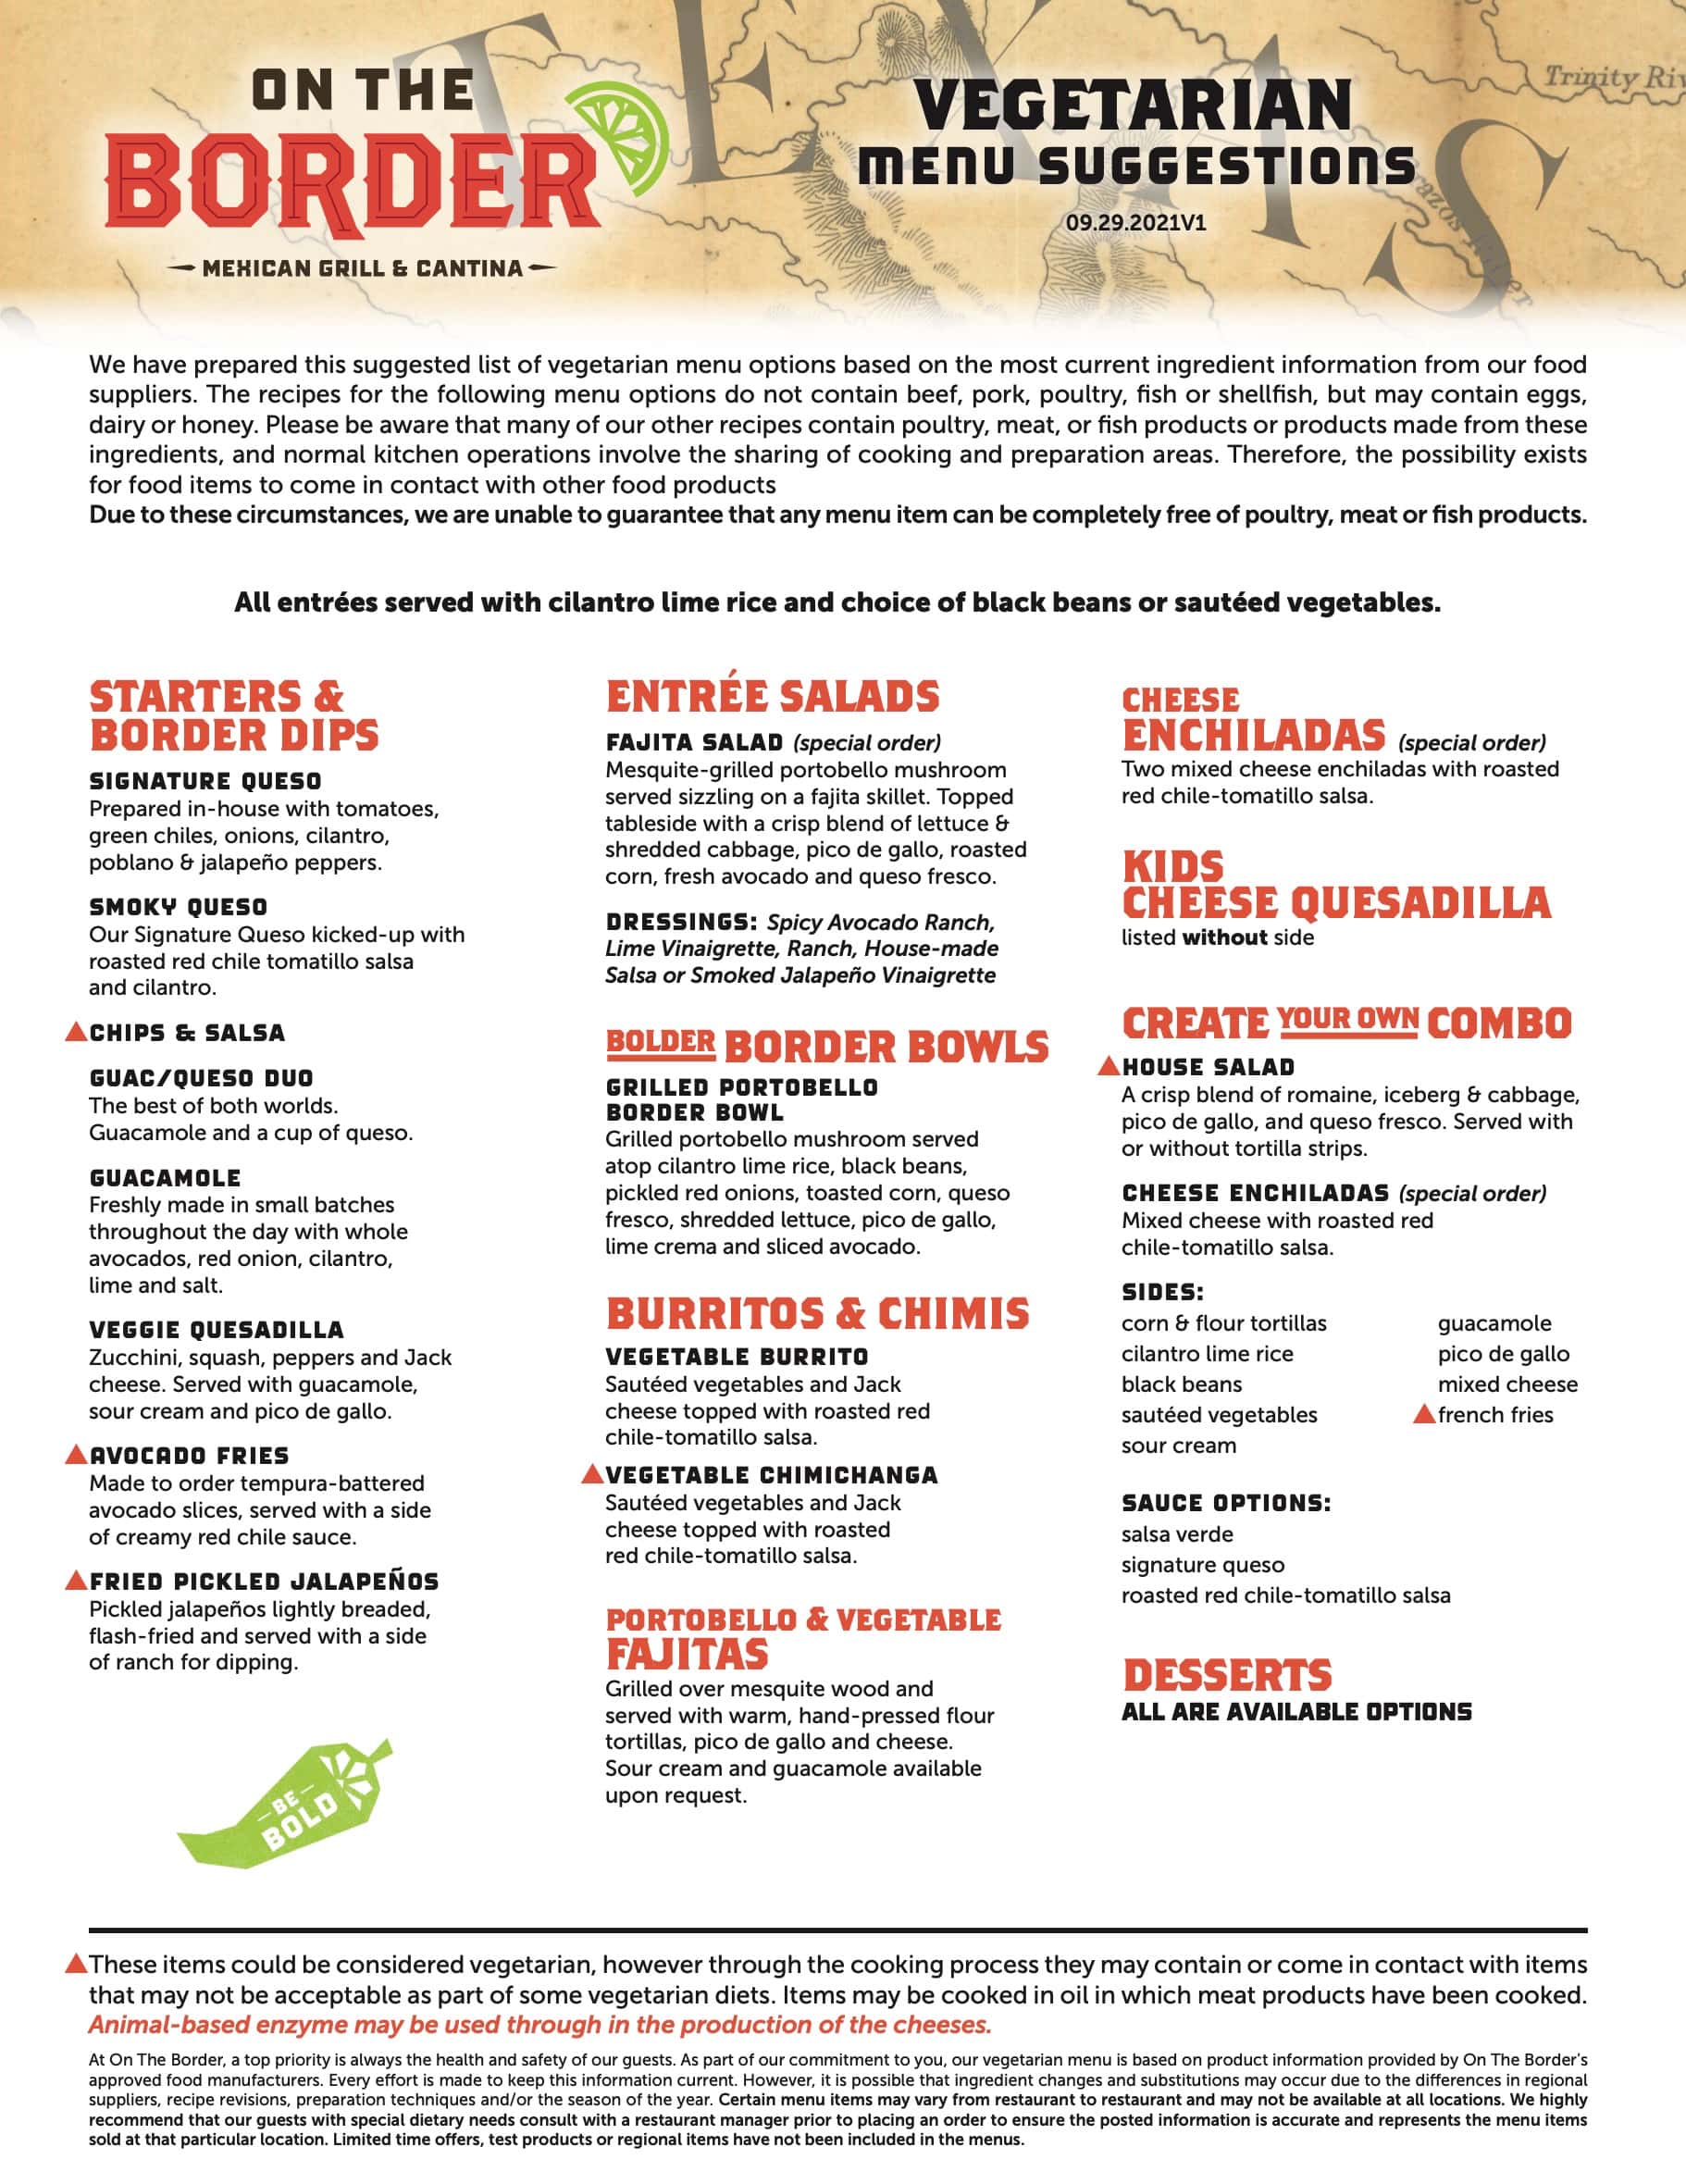 On The Border Mexican Grill Vegetarian Menu